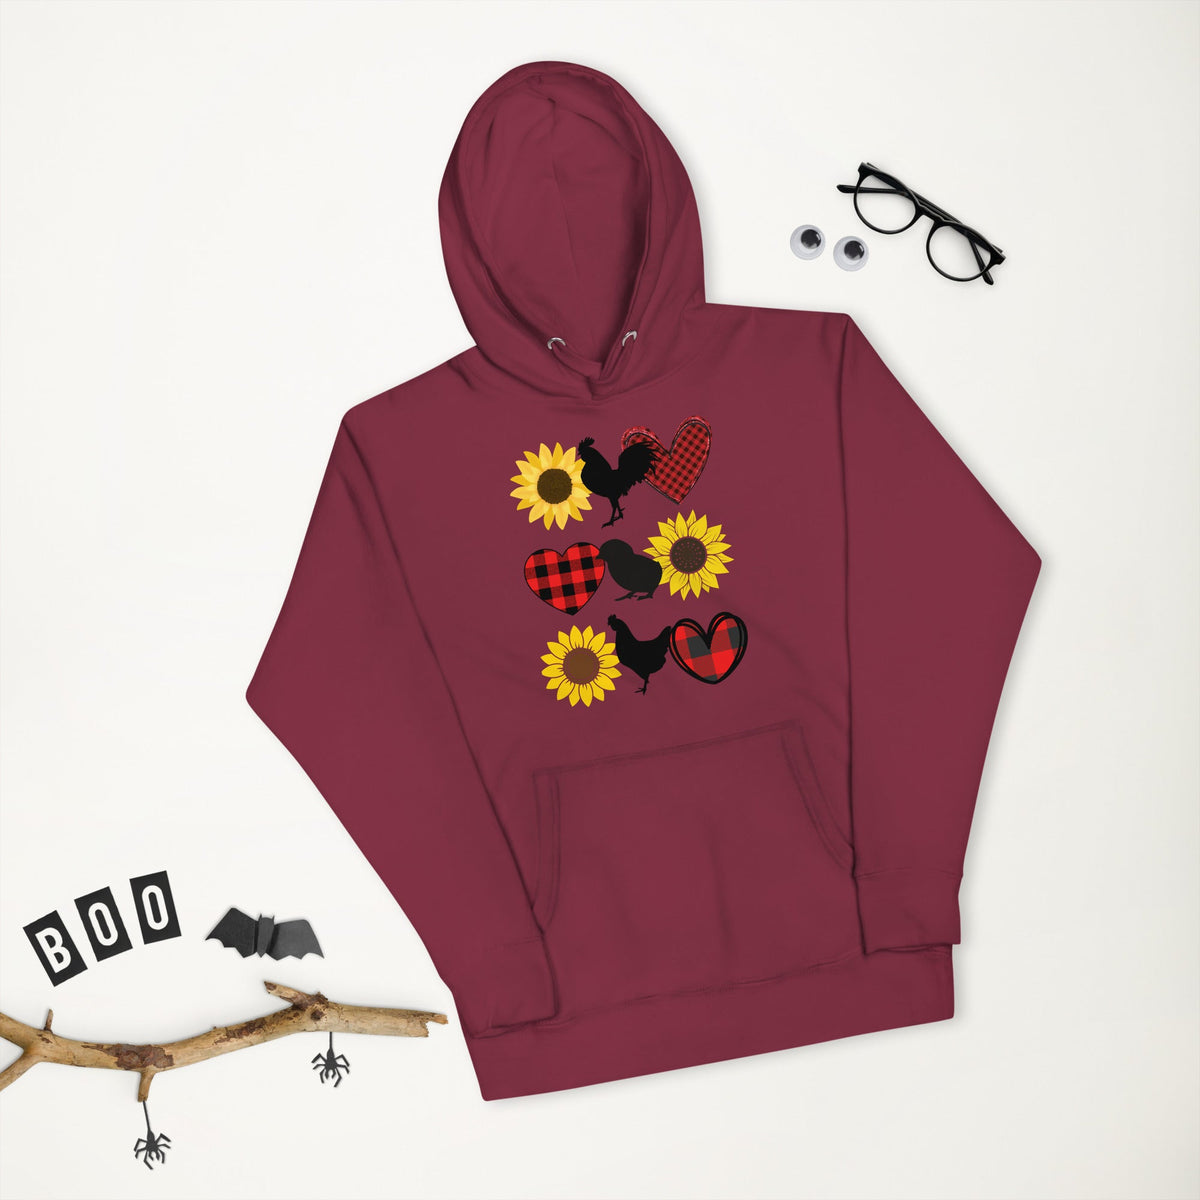 Fall Sunflower Adult Unisex Hoodie - Cluck It All Farms